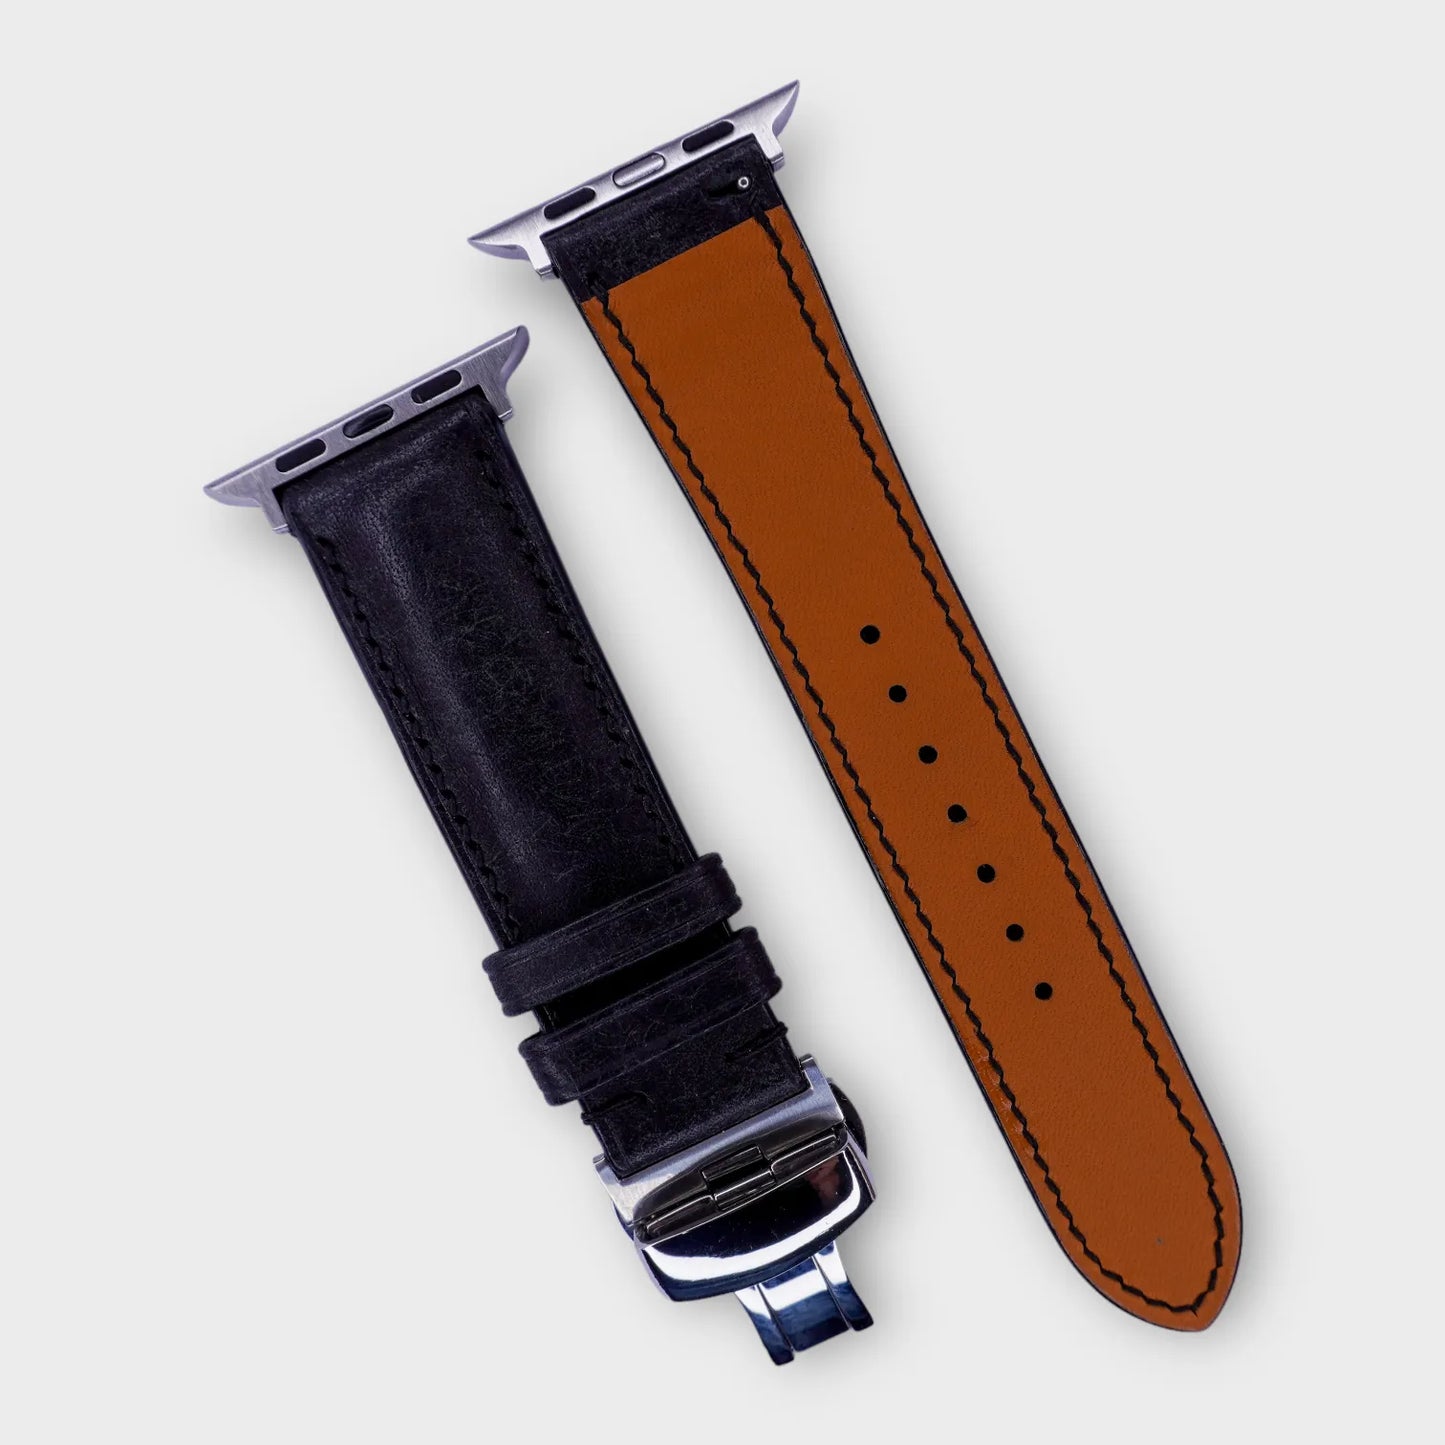 Iconic black leather Apple Watch band in Pueblo leather, embodies classic ruggedness.